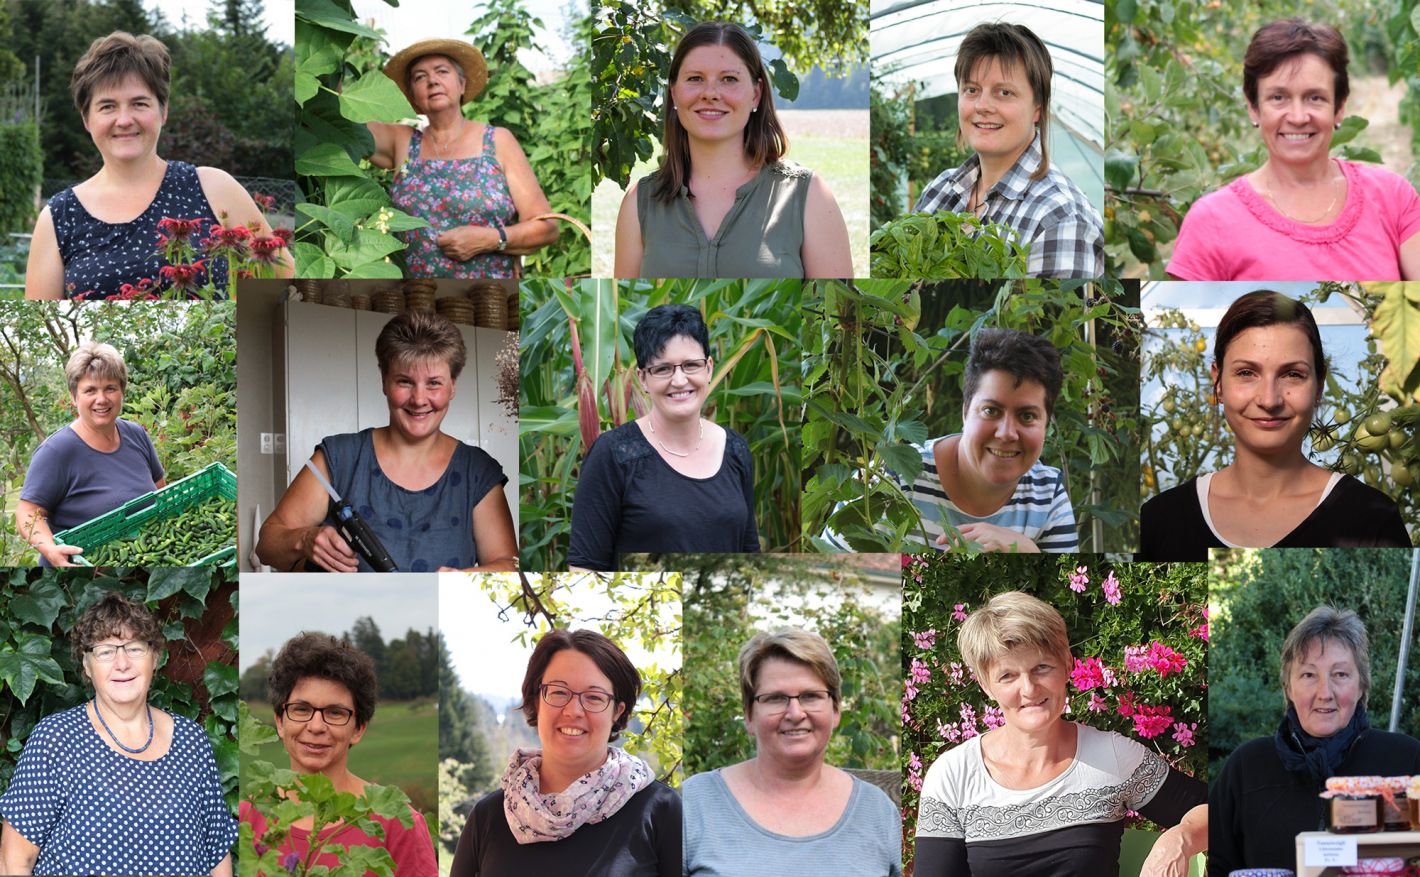 Picture collage of the farmers' wives from Bärner Burechorb